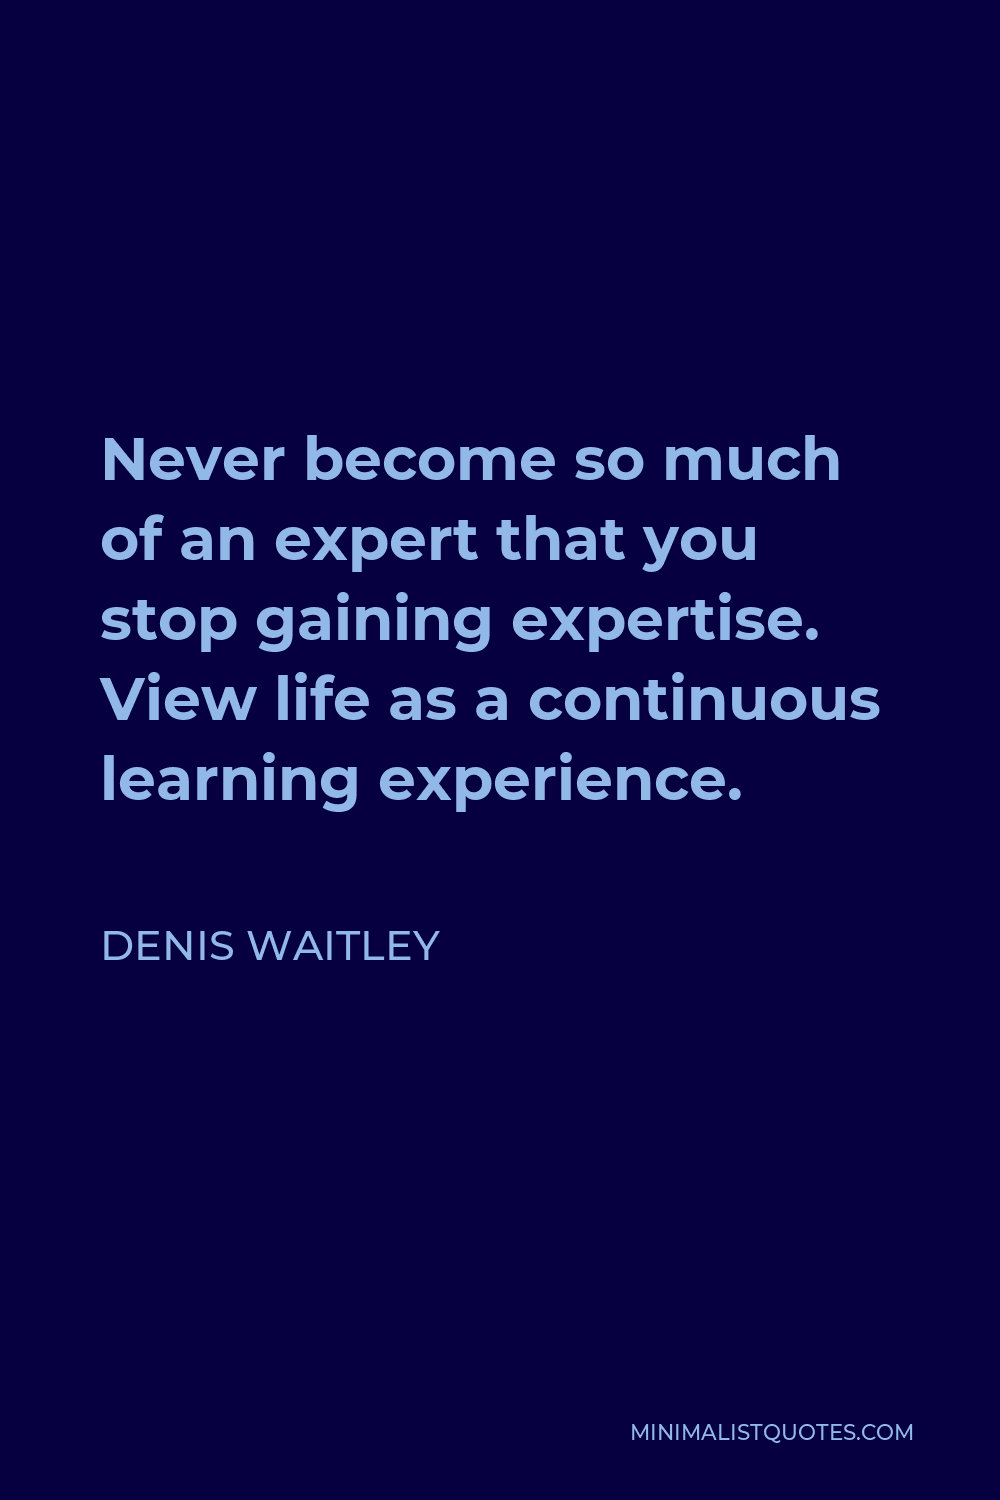 Denis Waitley Quote - Never become so much of an expert that you stop gaining expertise. View life as a continuous learning experience.